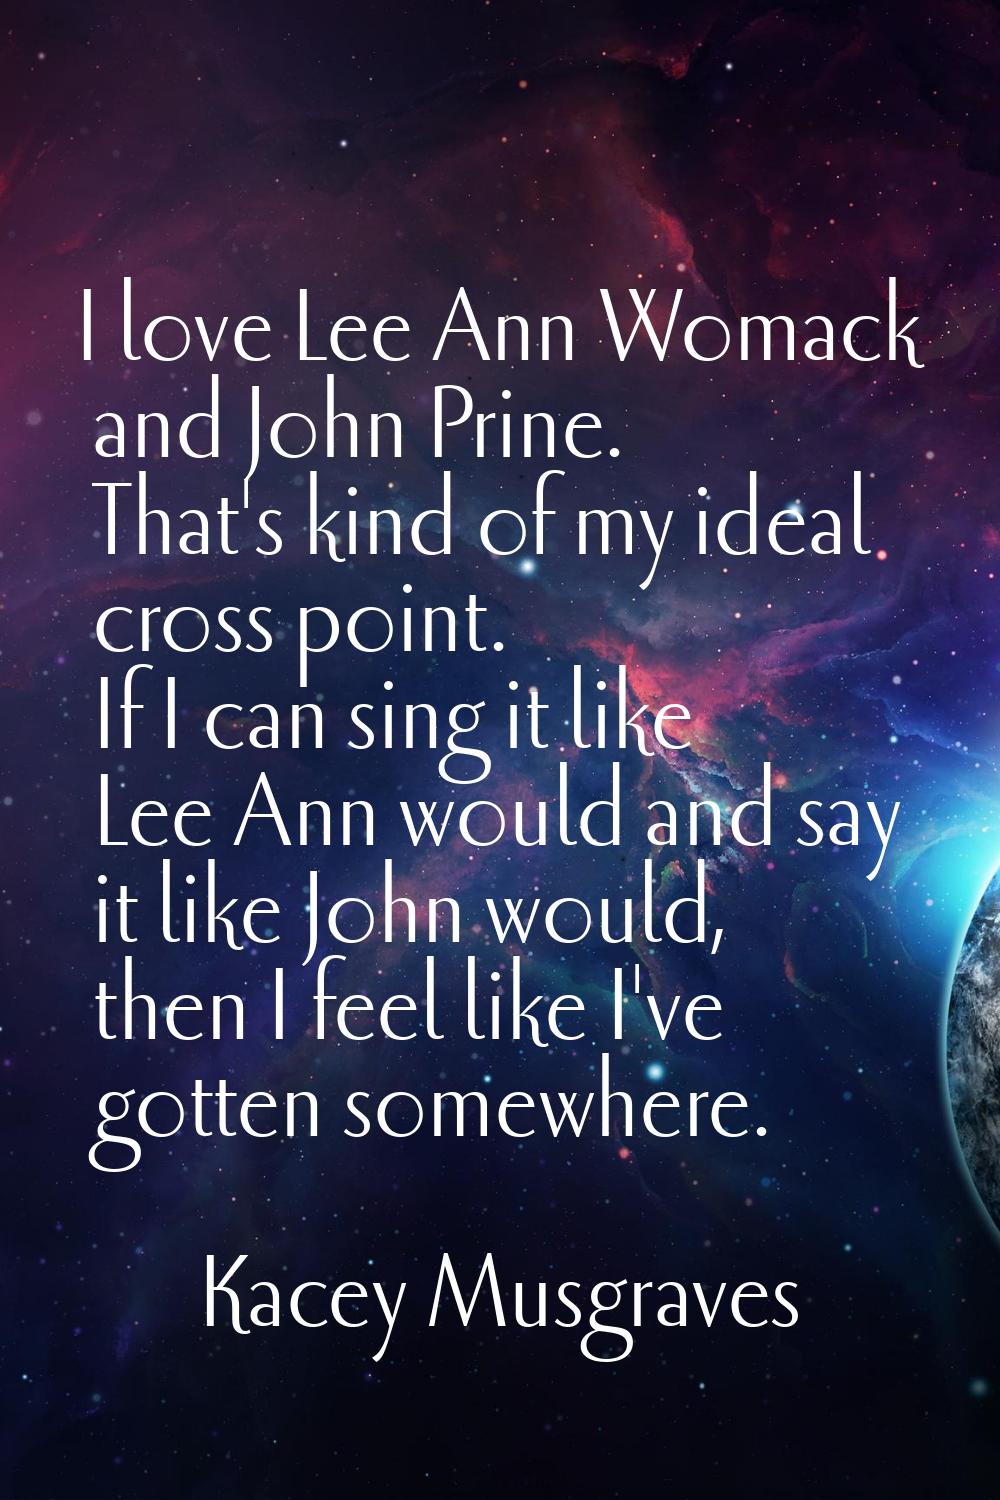 I love Lee Ann Womack and John Prine. That's kind of my ideal cross point. If I can sing it like Le